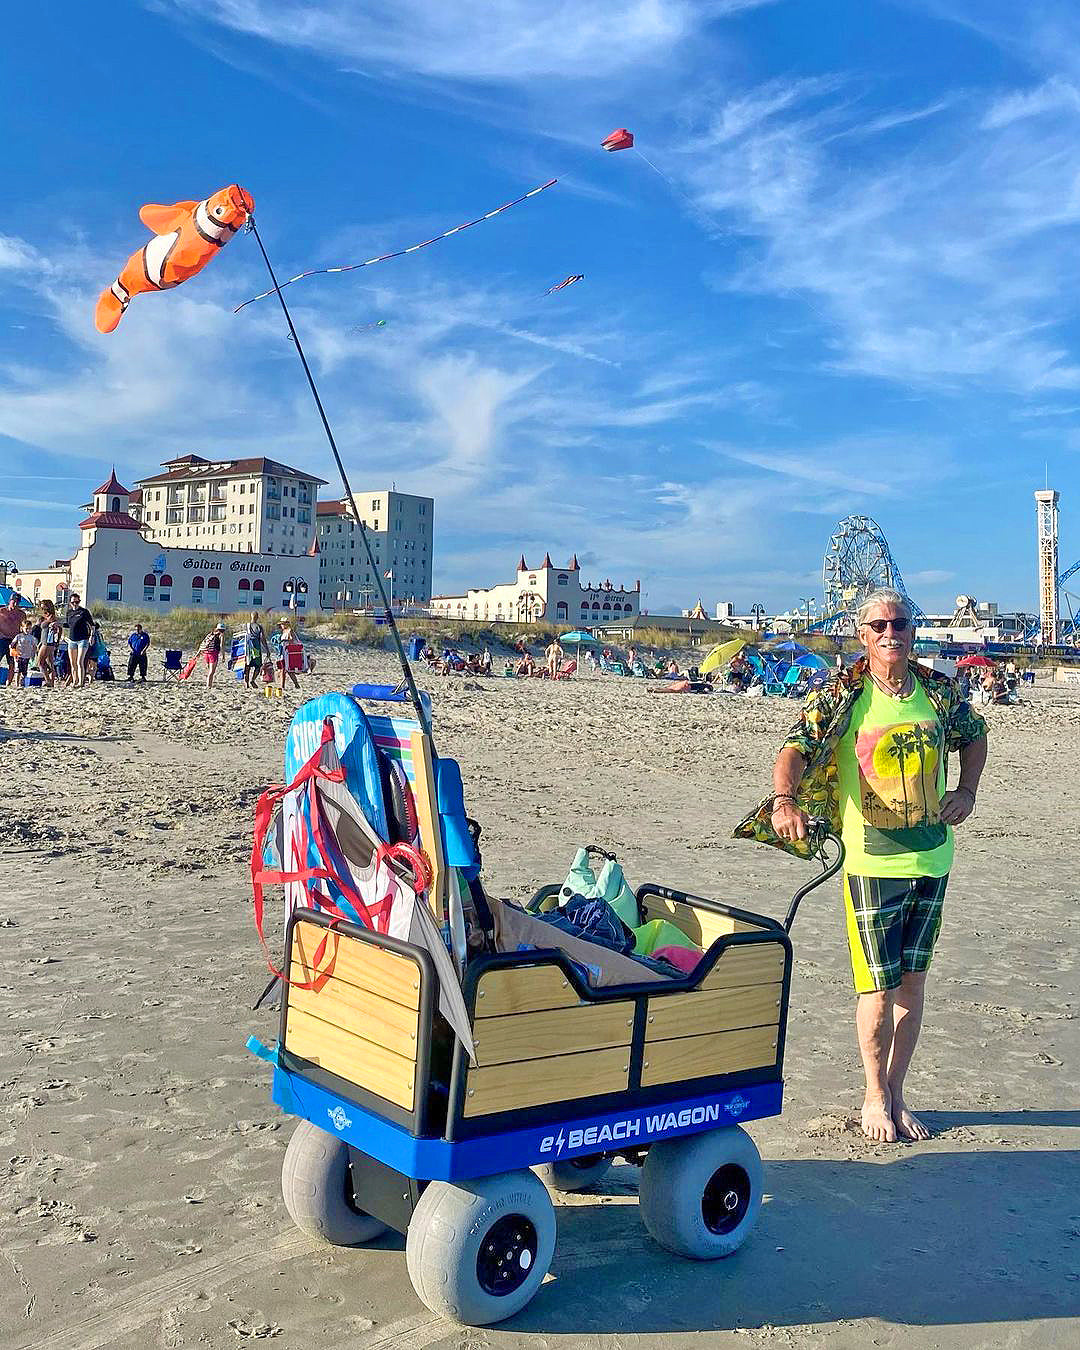 Doug Jewell with Air Circus Kite Shop in OCNJ